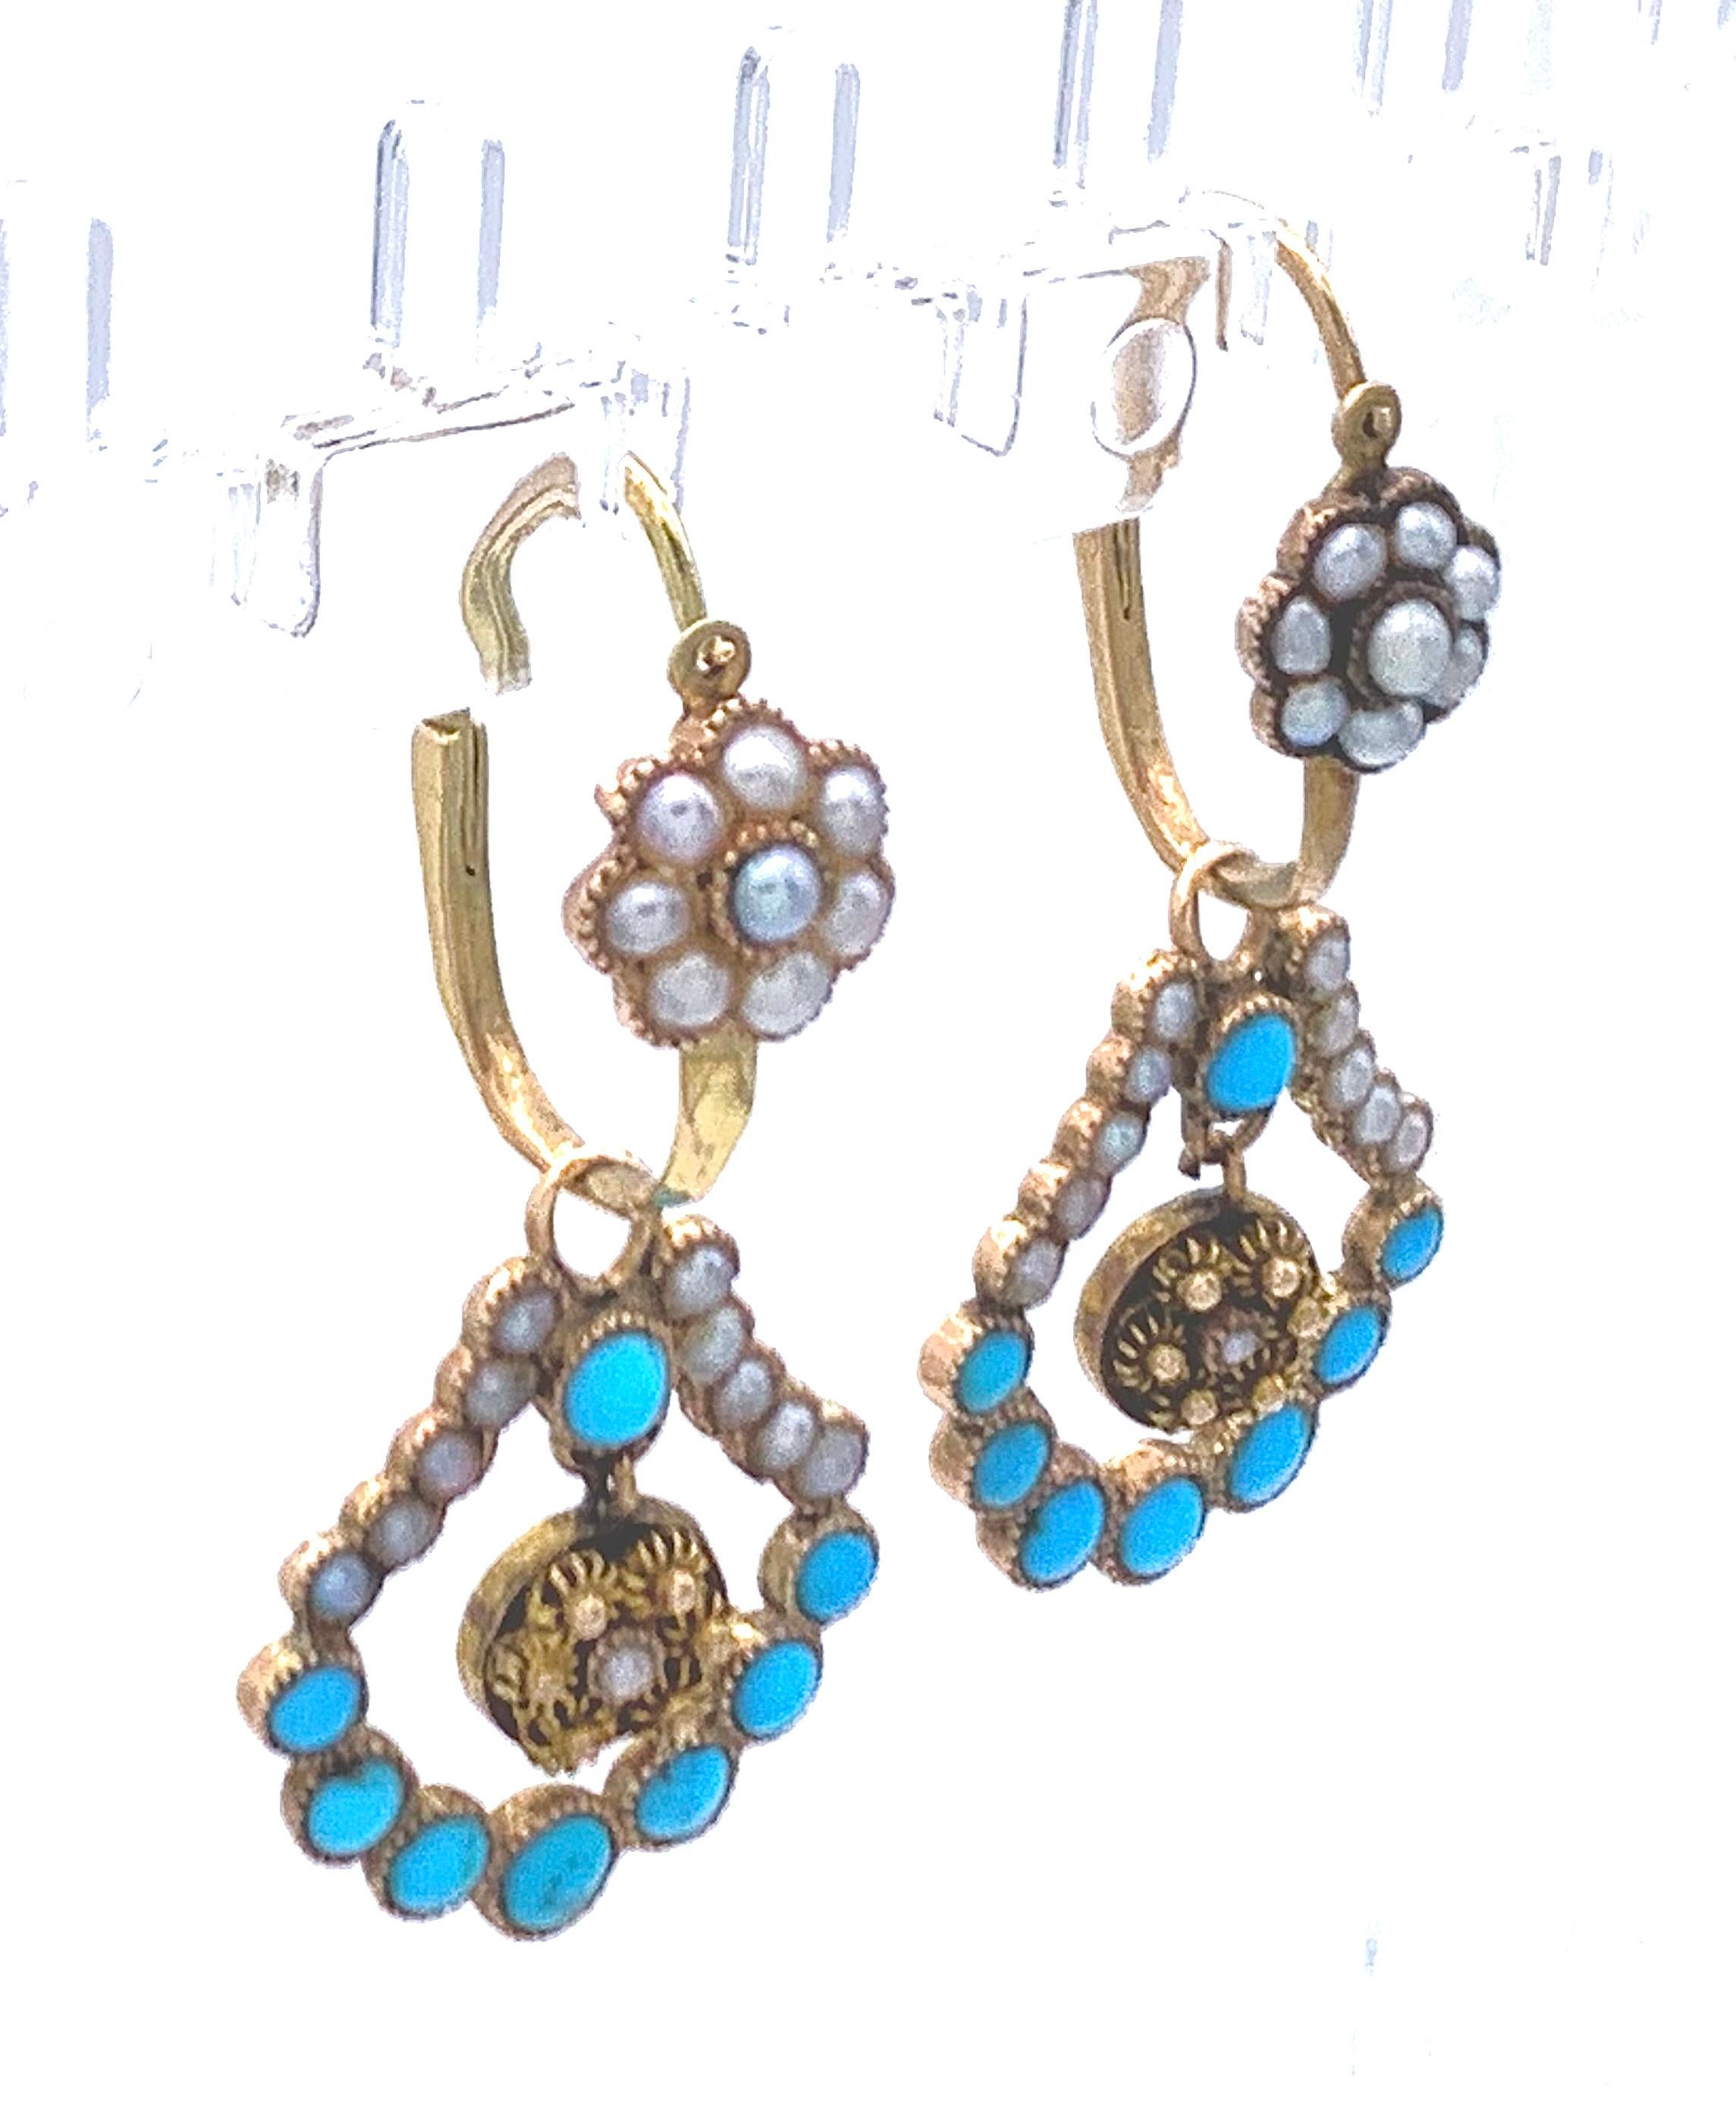 This is a fine example of delicate empire earrings, so called day and night earrings, the tops can be worn alone.
Small gold rosettes, oriental pearls and turqoise cabochons are fashioned  to make up these pretty
earrings. The dangling elements are